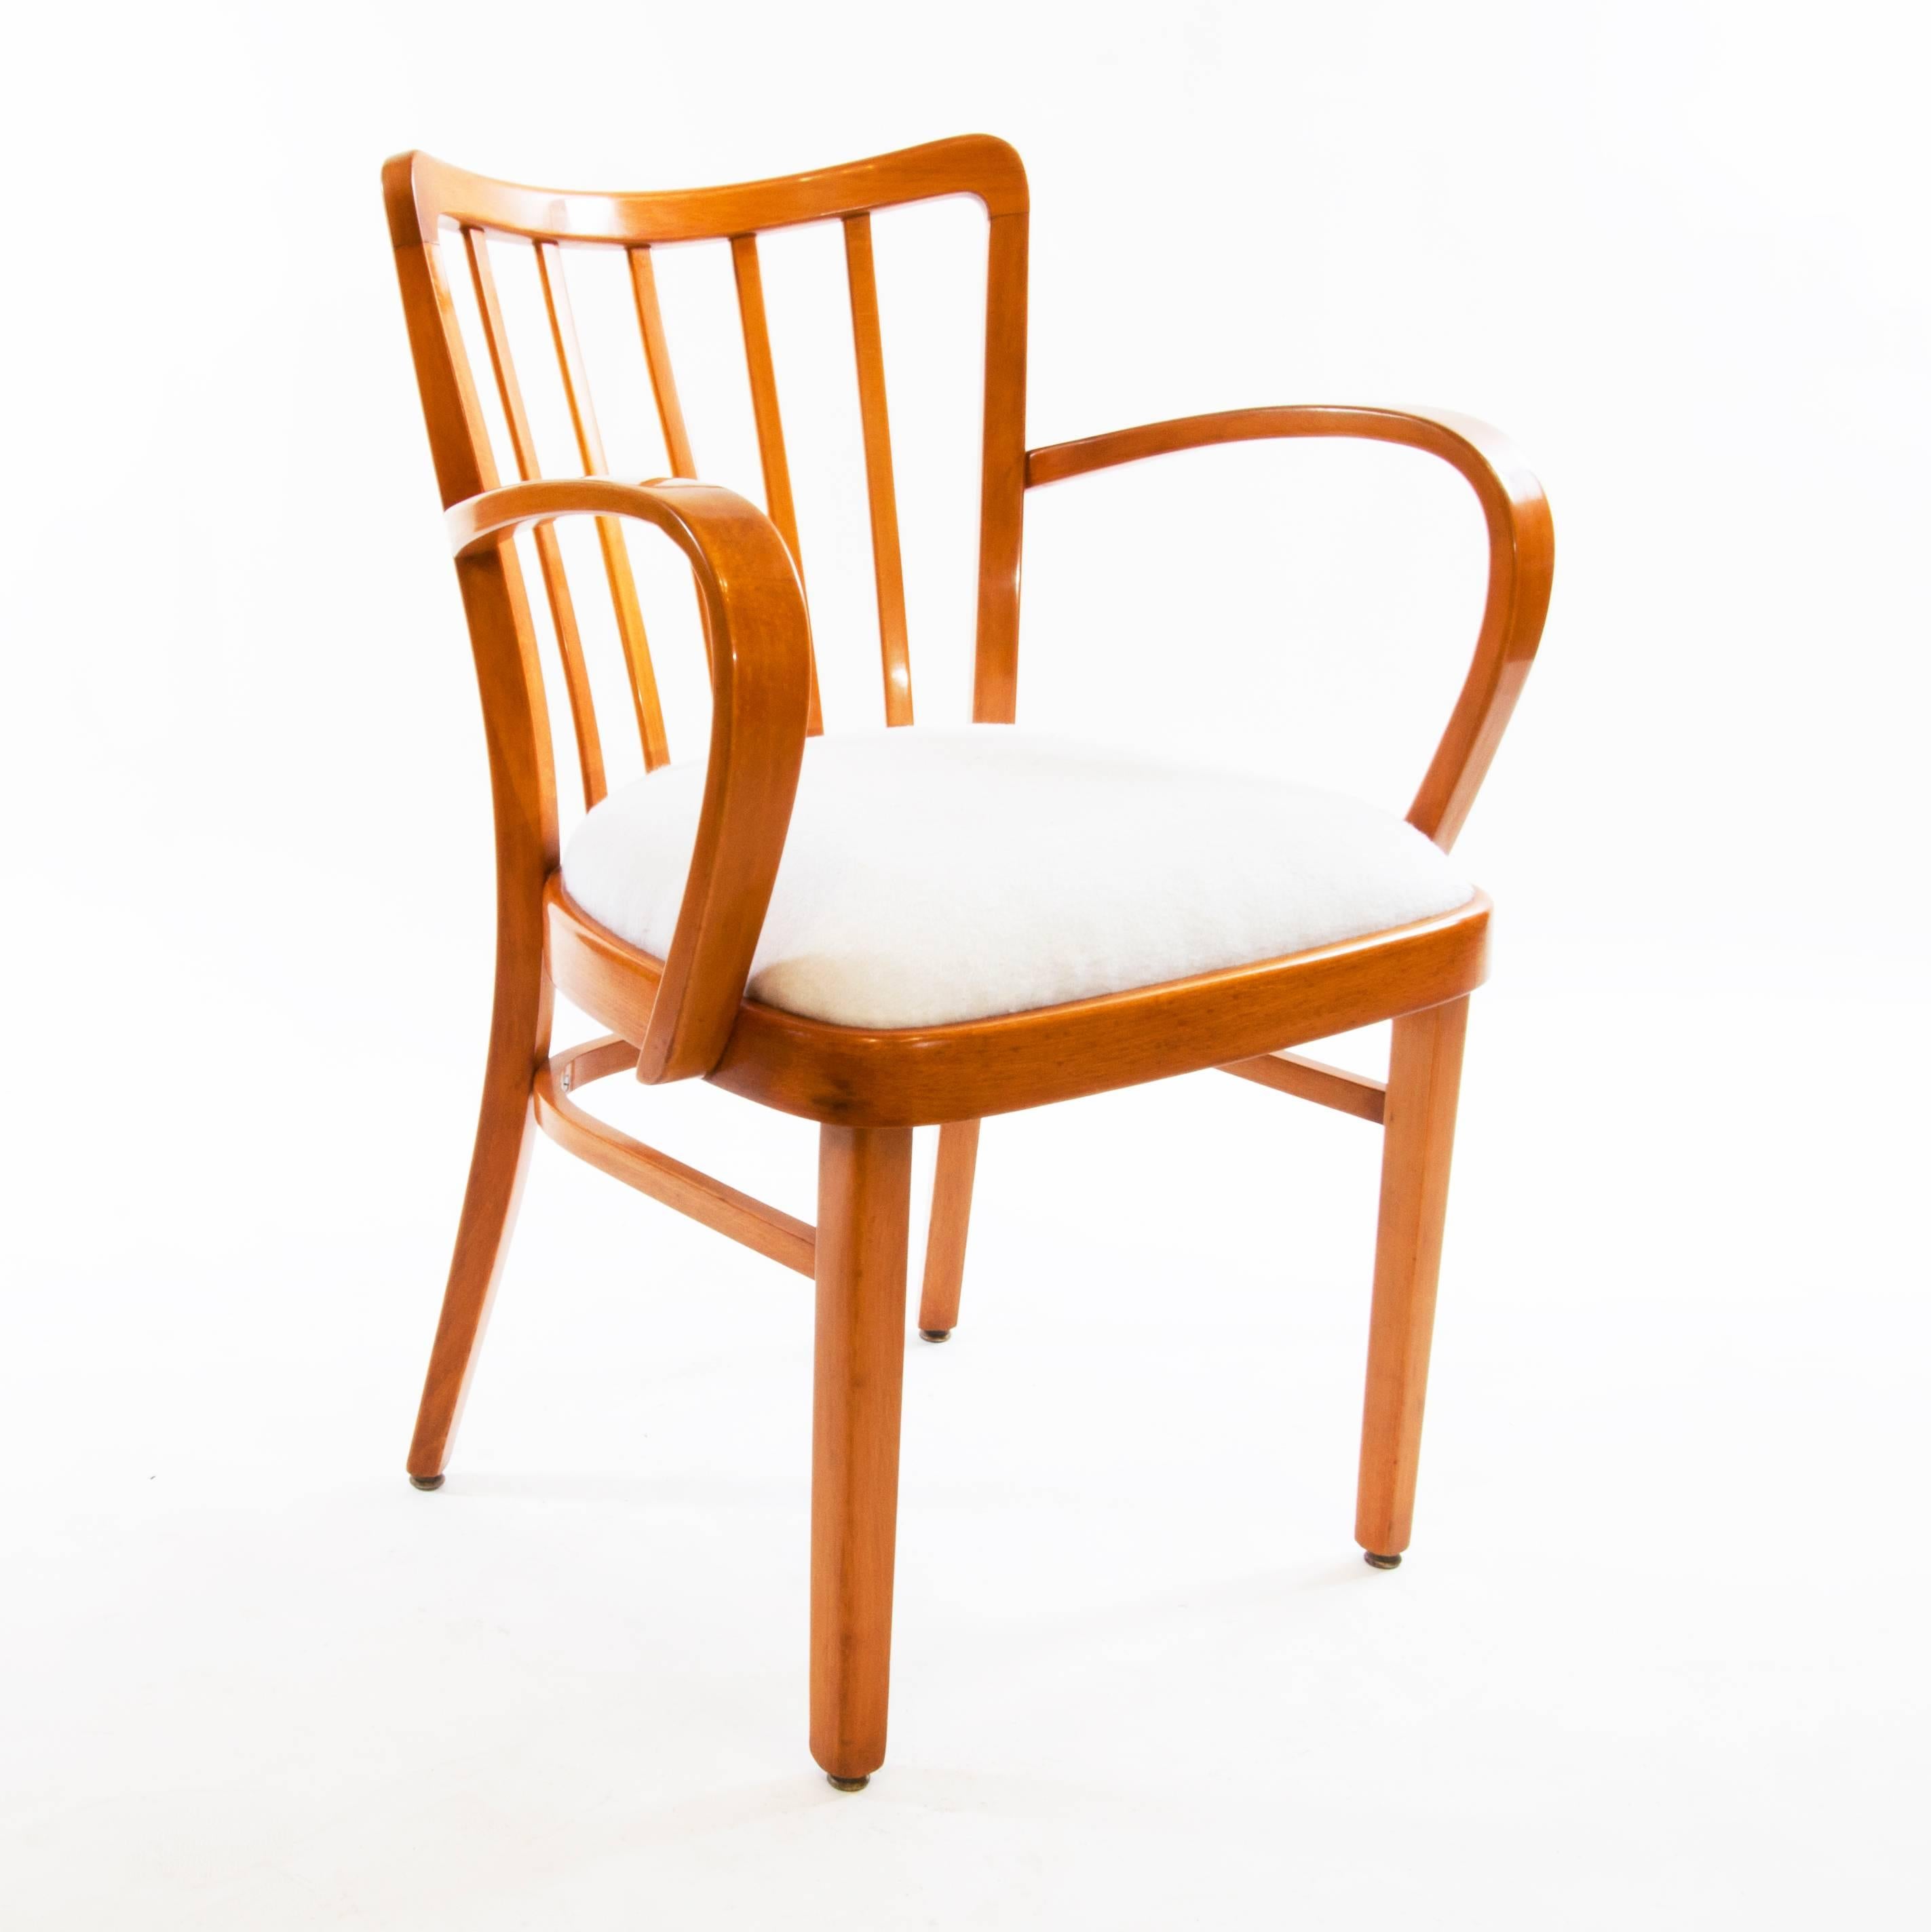 Mid-20th Century Josef Frank Dinner Armchair for No. 626 Thonet, 1935 For Sale